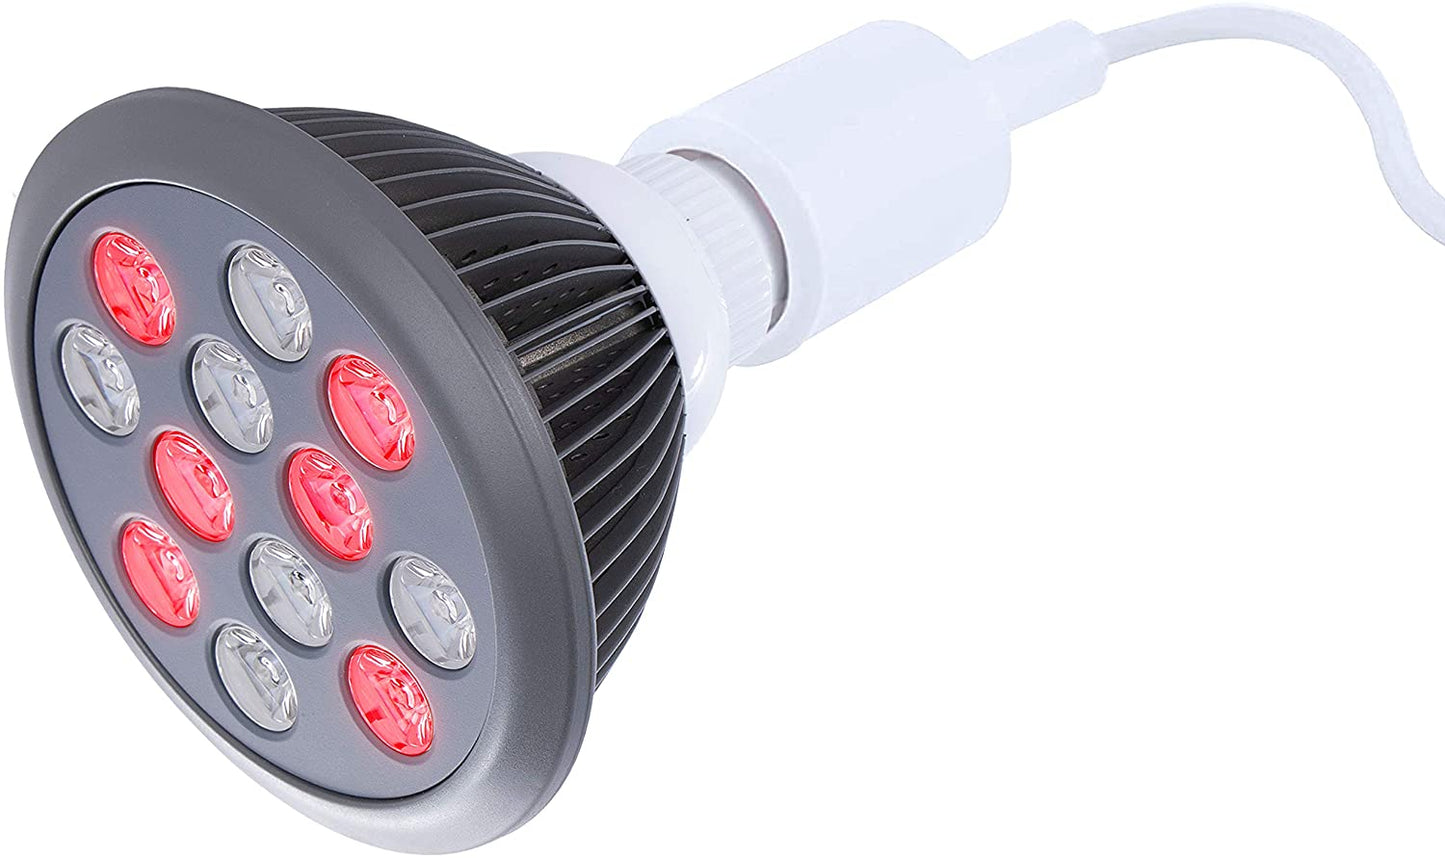 Red Light Therapy Bulb Power Cord Included Red 660nm Near Infrared 850nm 12 LEDs. High Irradiance Combo Treatment for Skin, Pain Relief, Anti Aging, Muscle Recovery, Performance